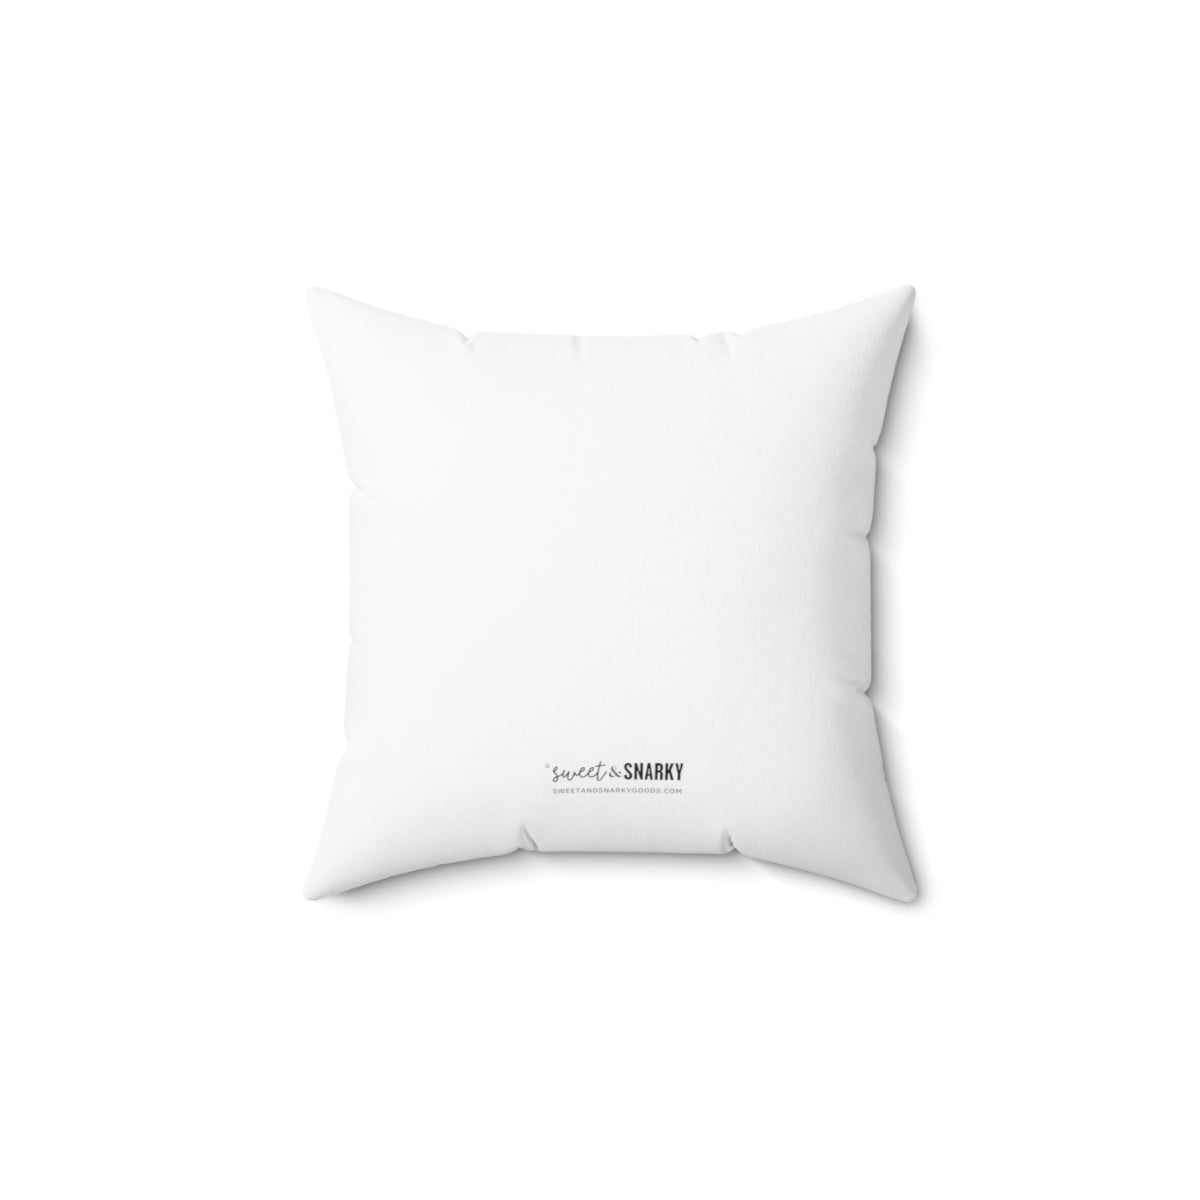 Jesus Saves, He Almost Has Enough for a New Scooter | Snarky Throw Pillow | 4 sizes